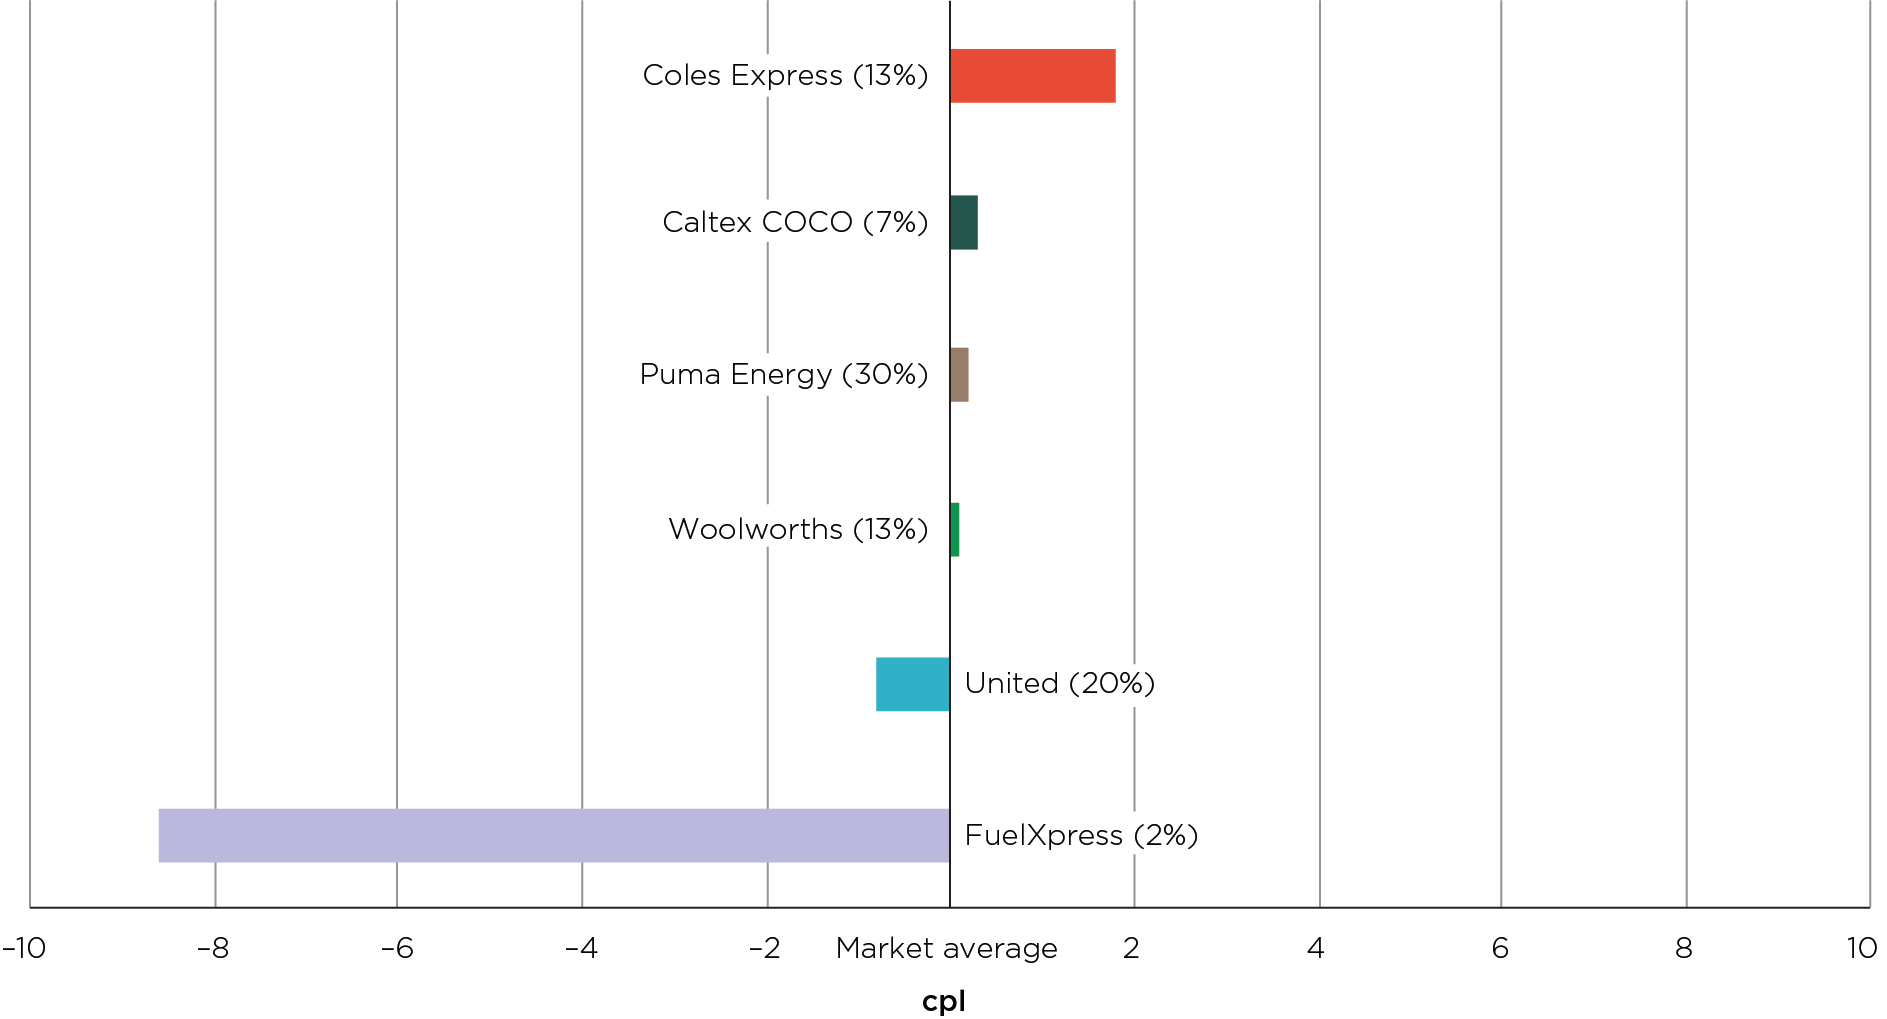 Difference between each major retailer’s annual average petrol price and the market annual average petrol price in Darwin in 2018